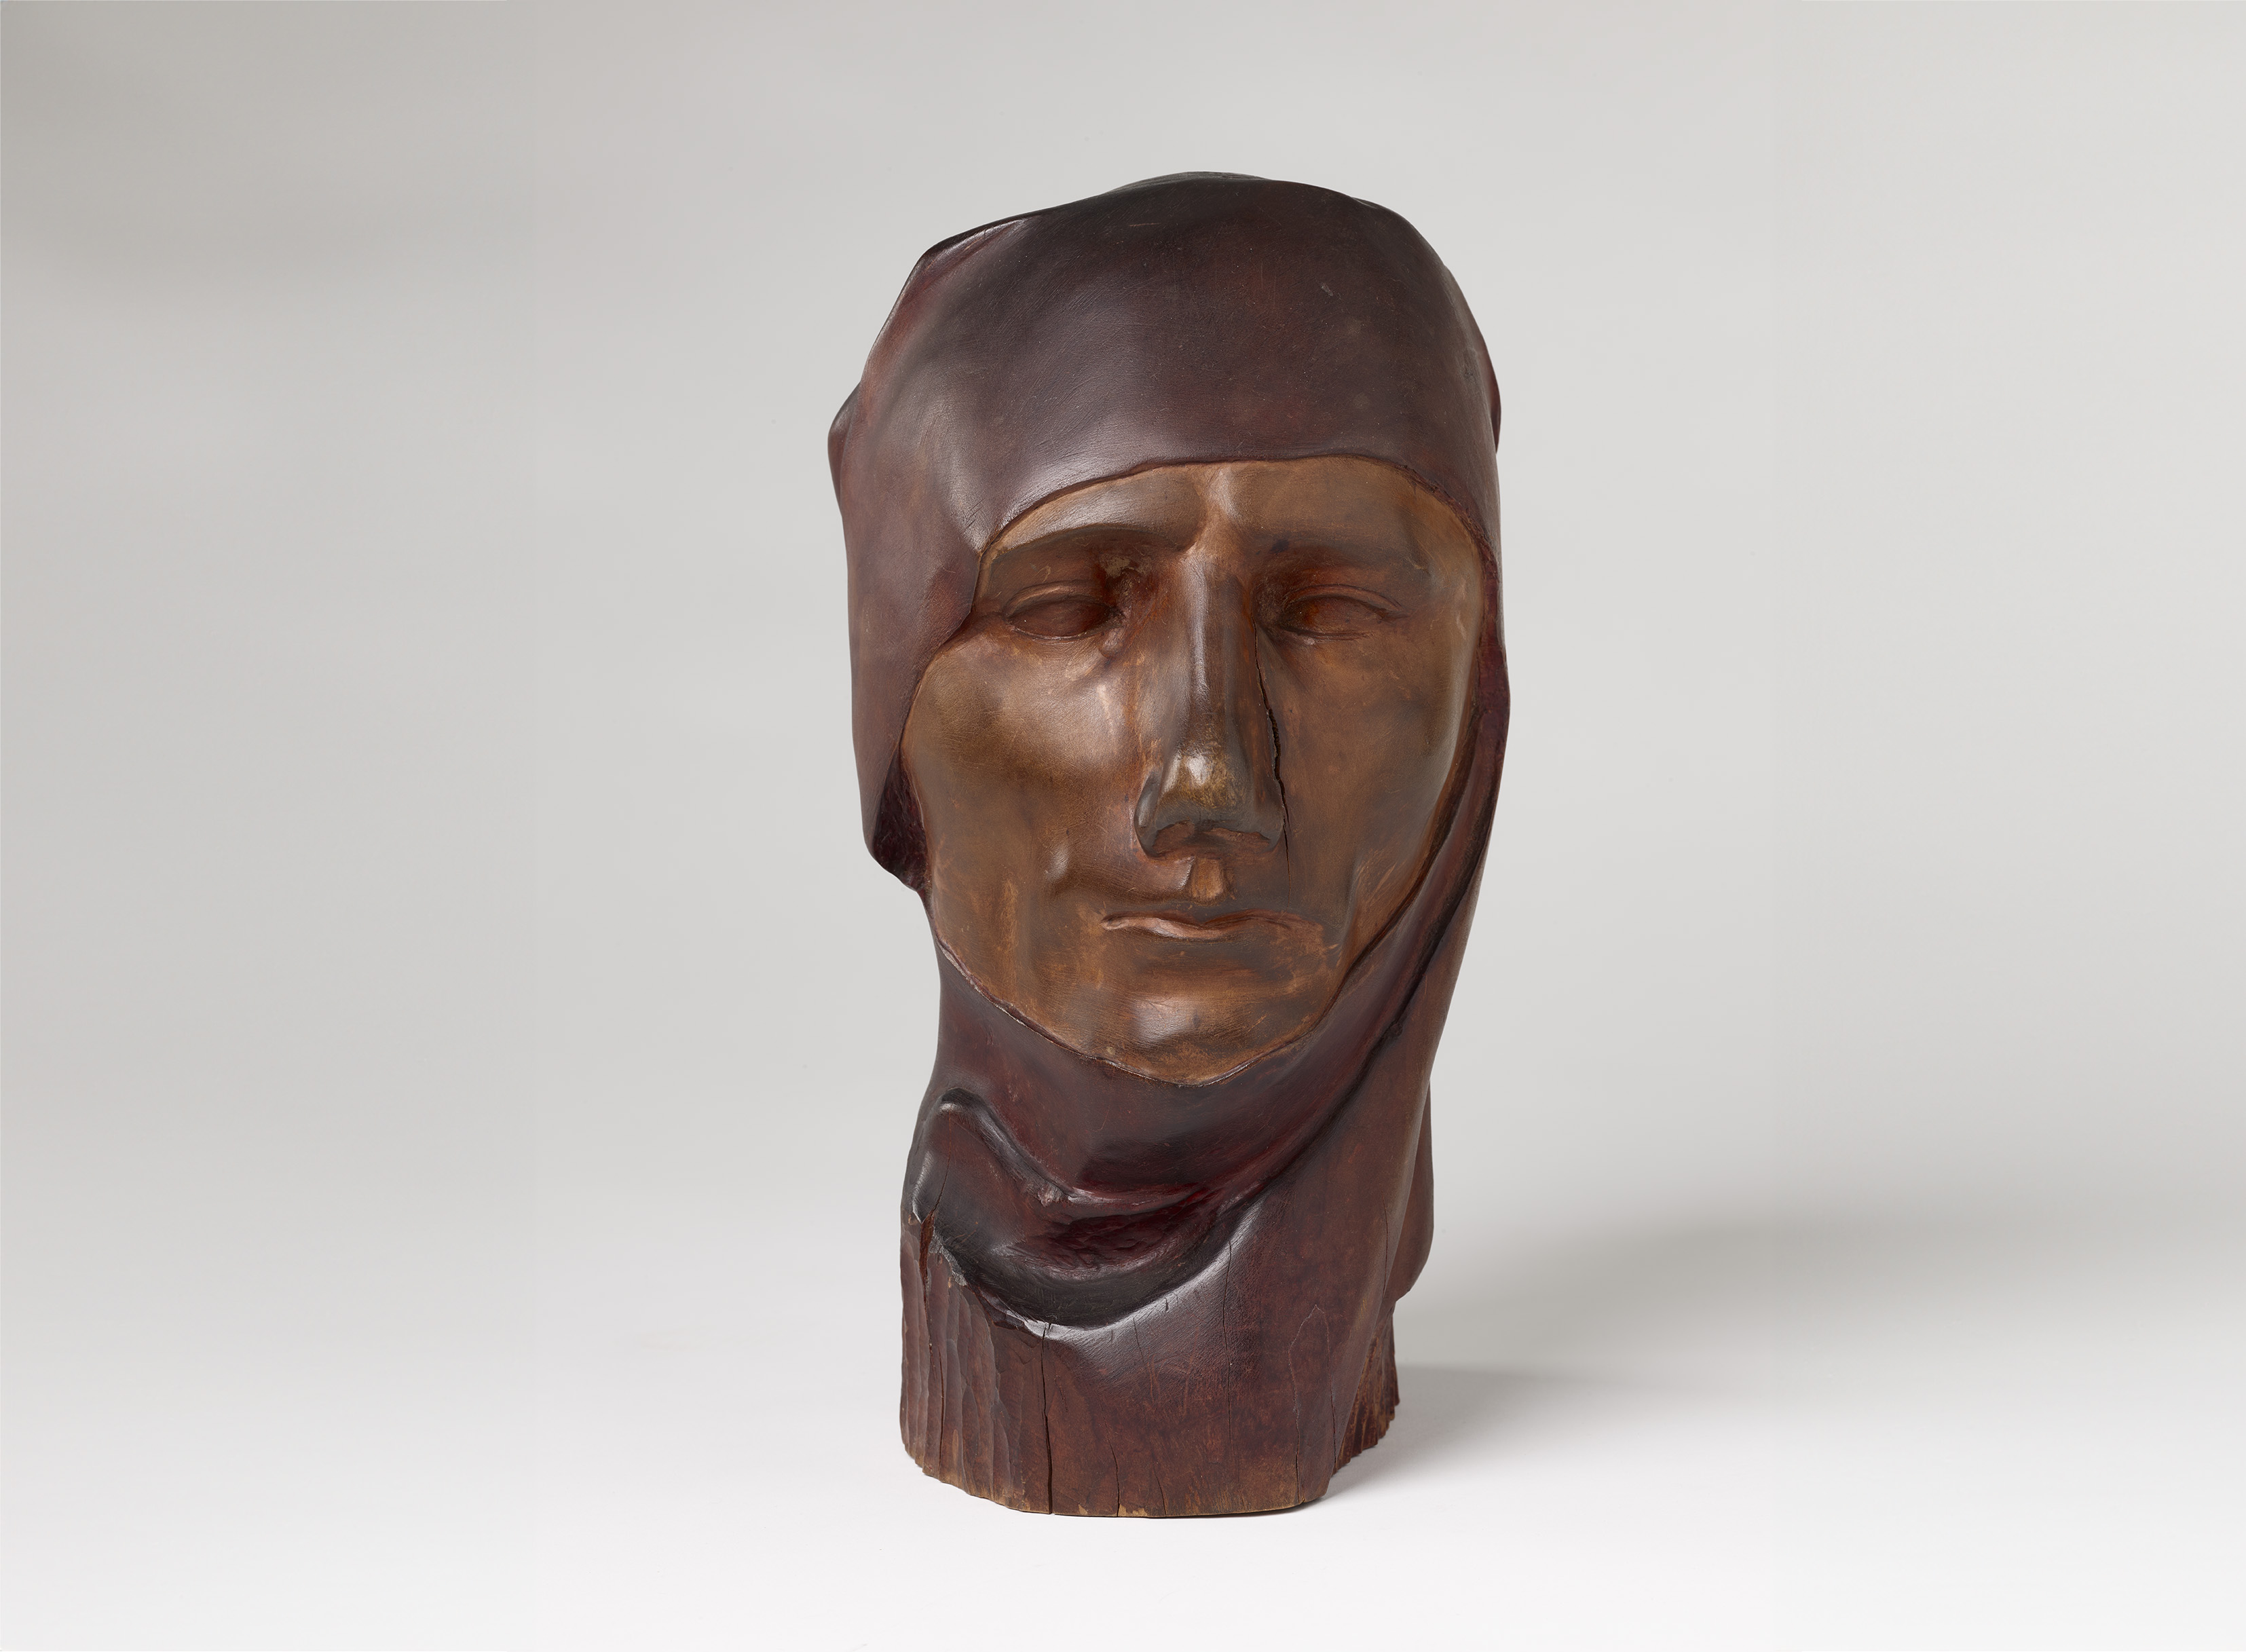 Discontent, a wooden sculpture of a woman's head by Prophet